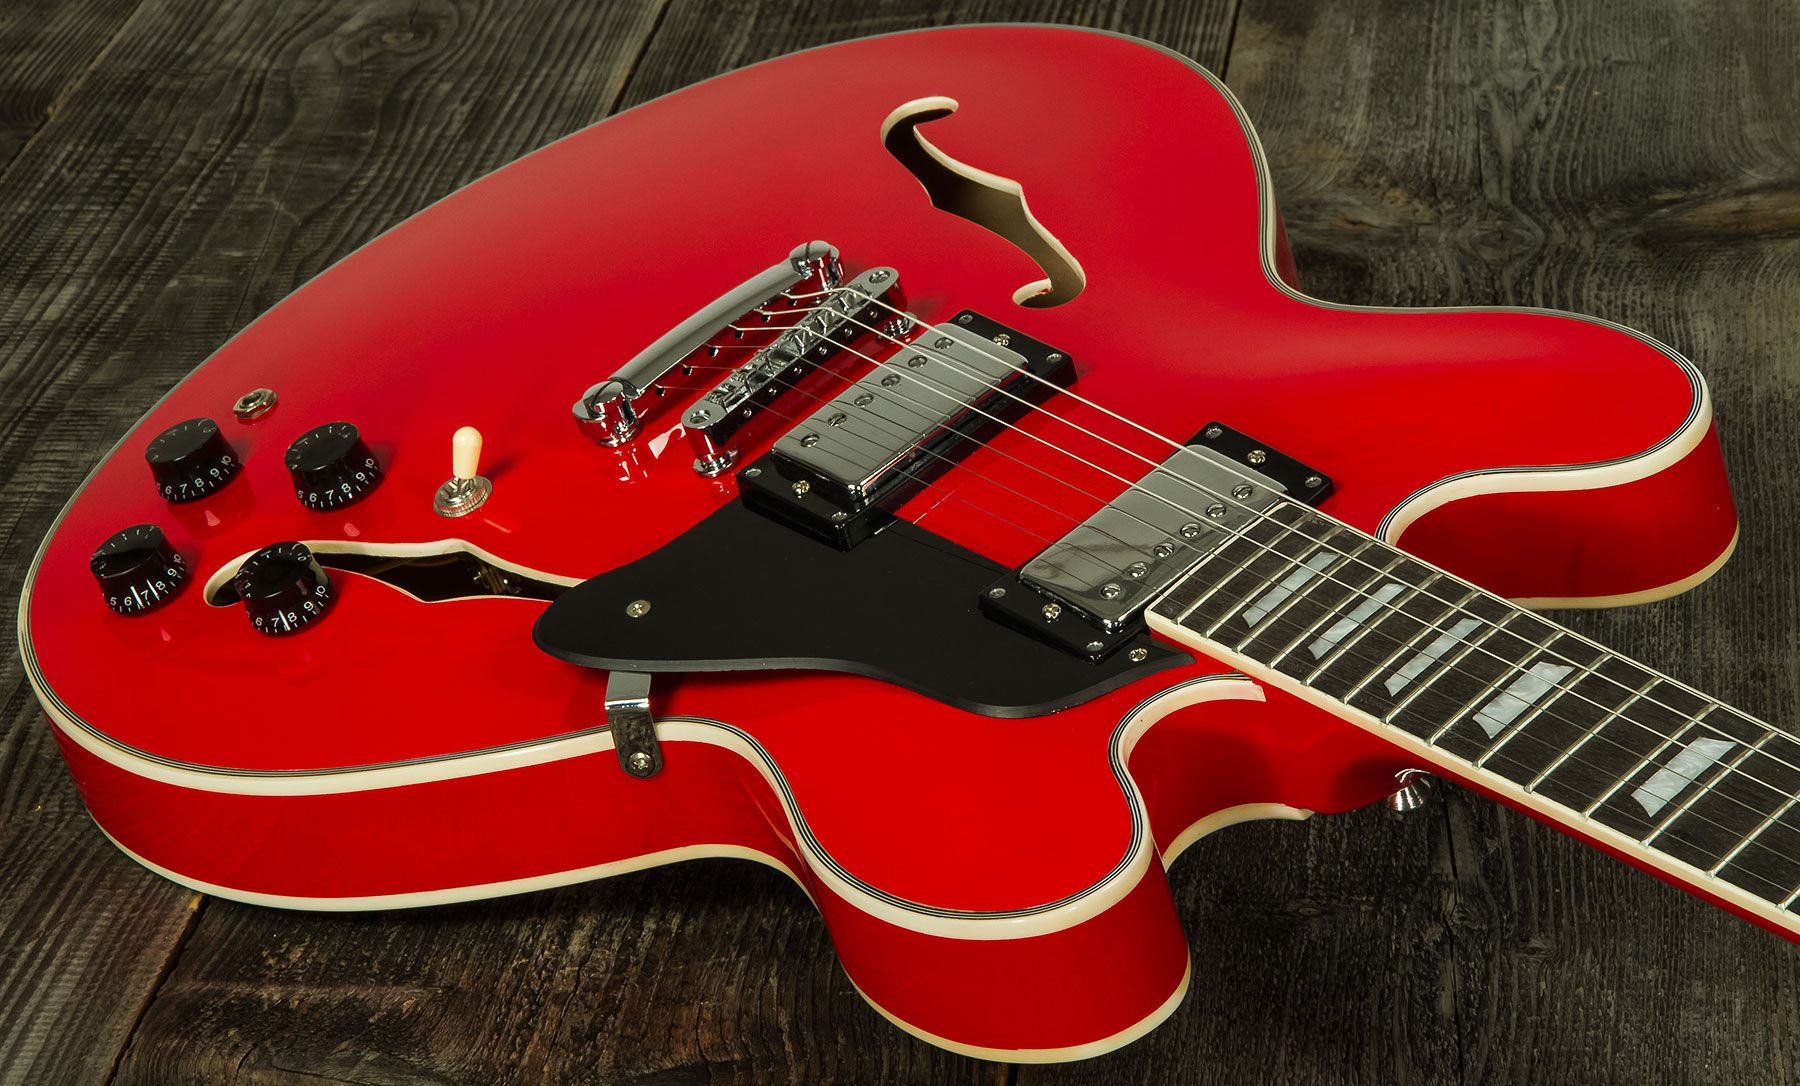 Eastone Gj70 Hh Ht Pur - Red - Semi-hollow electric guitar - Variation 1